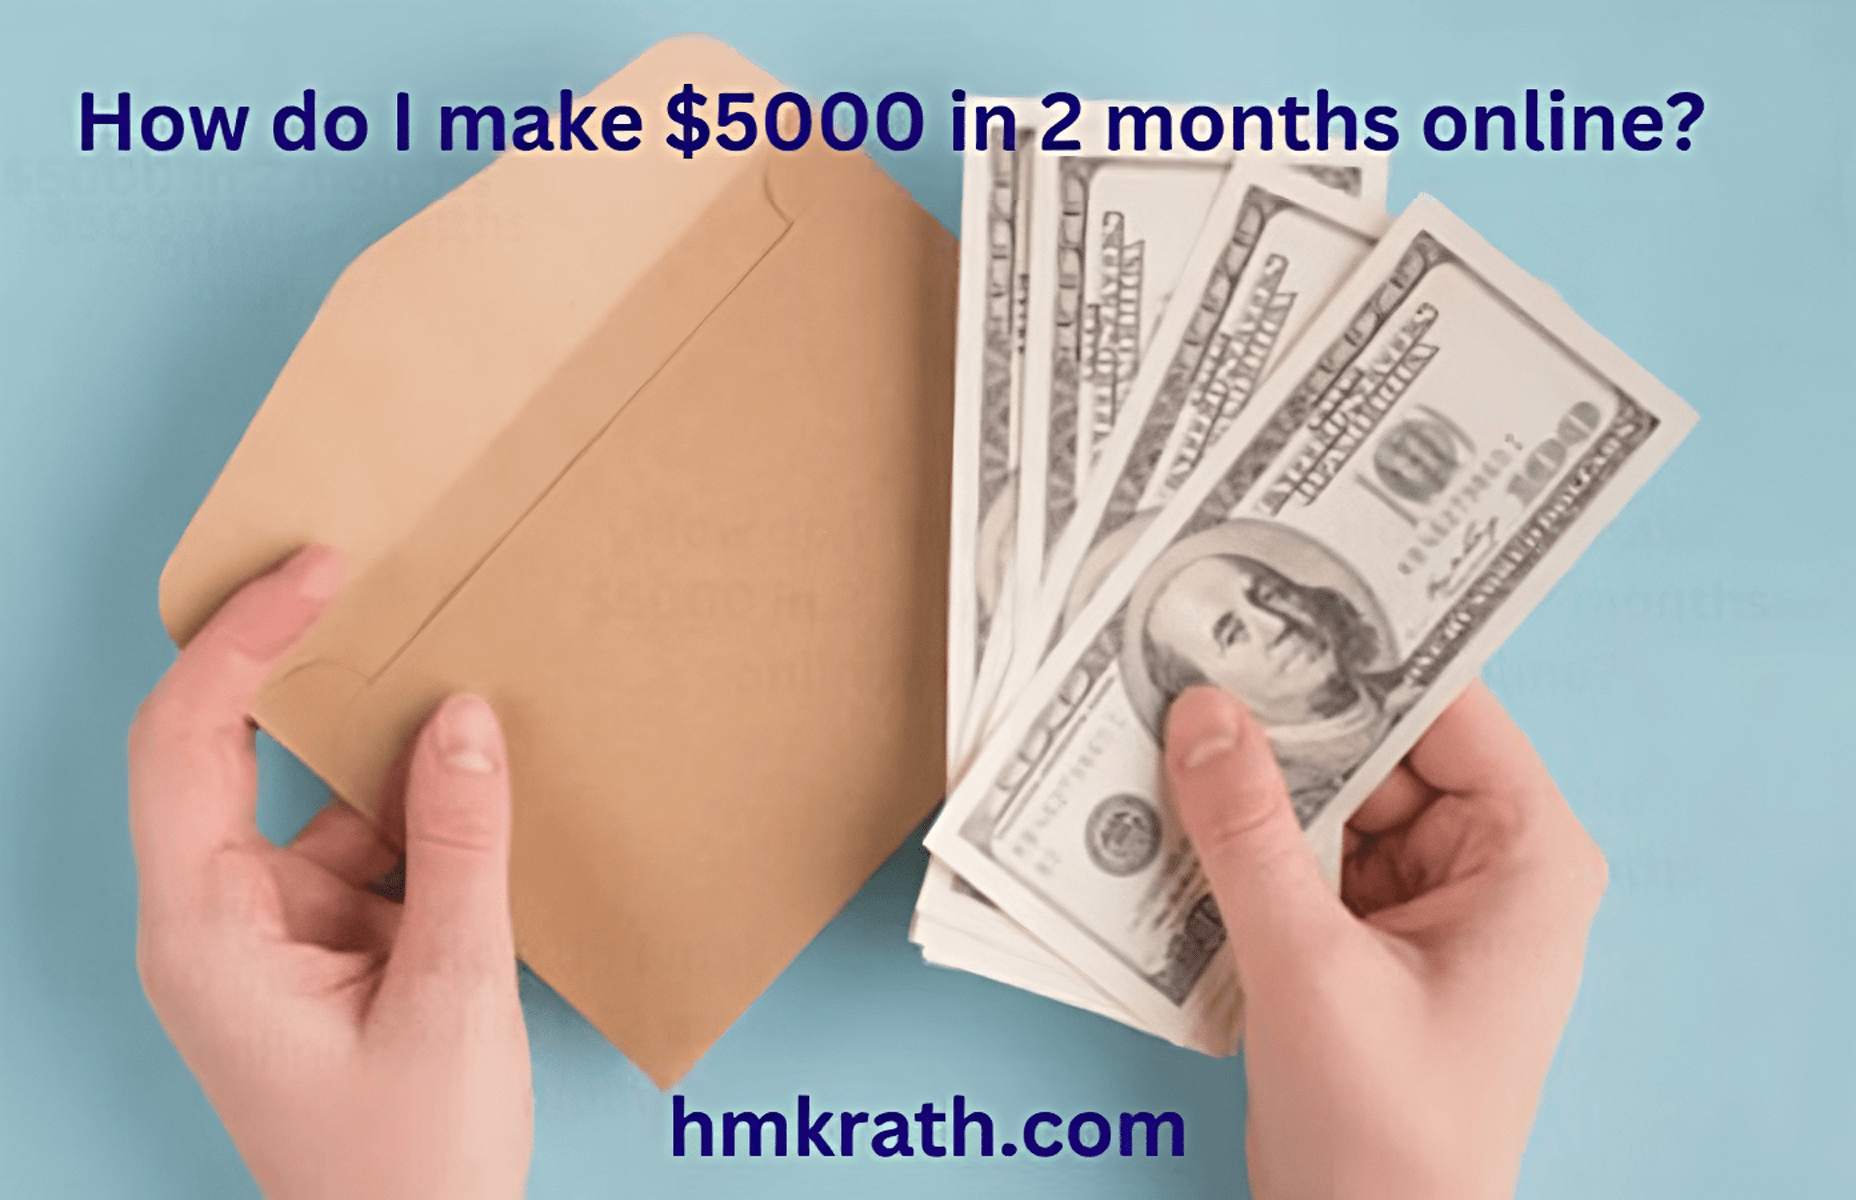 How do I make $5000 in 2 months online?